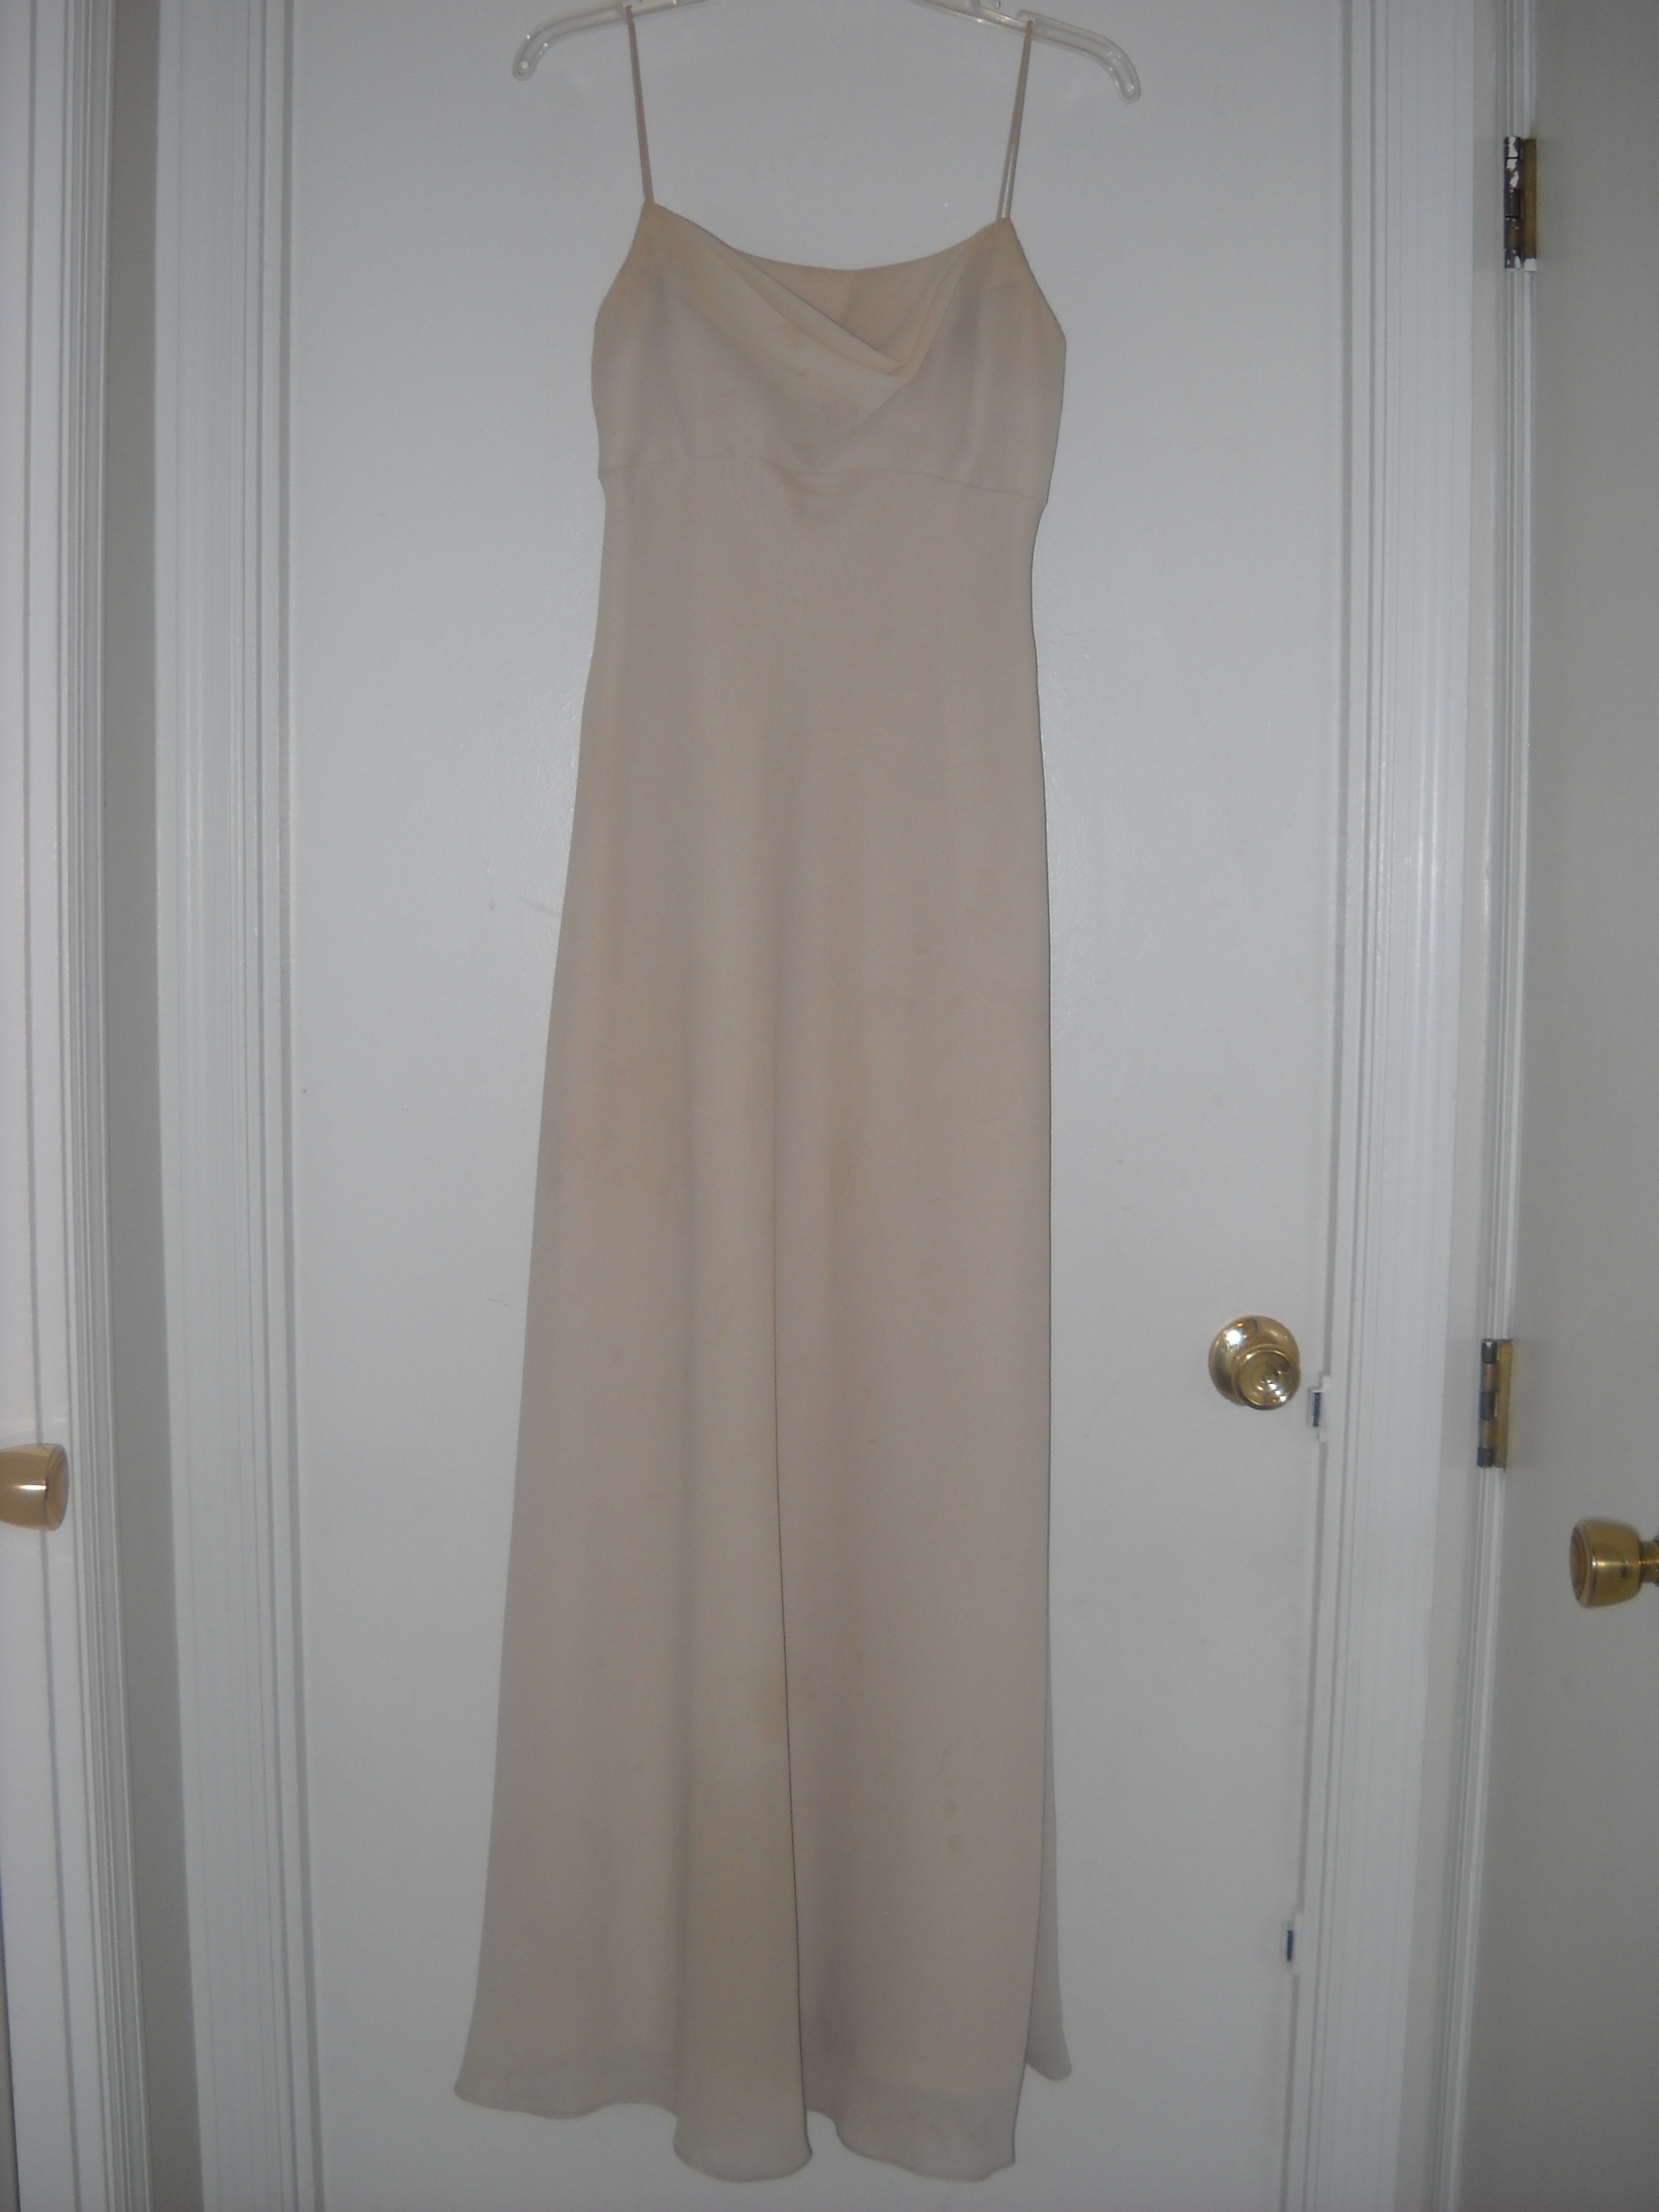 Size 6 - Cream Full Length Prom/Homecoming/Ball Gown